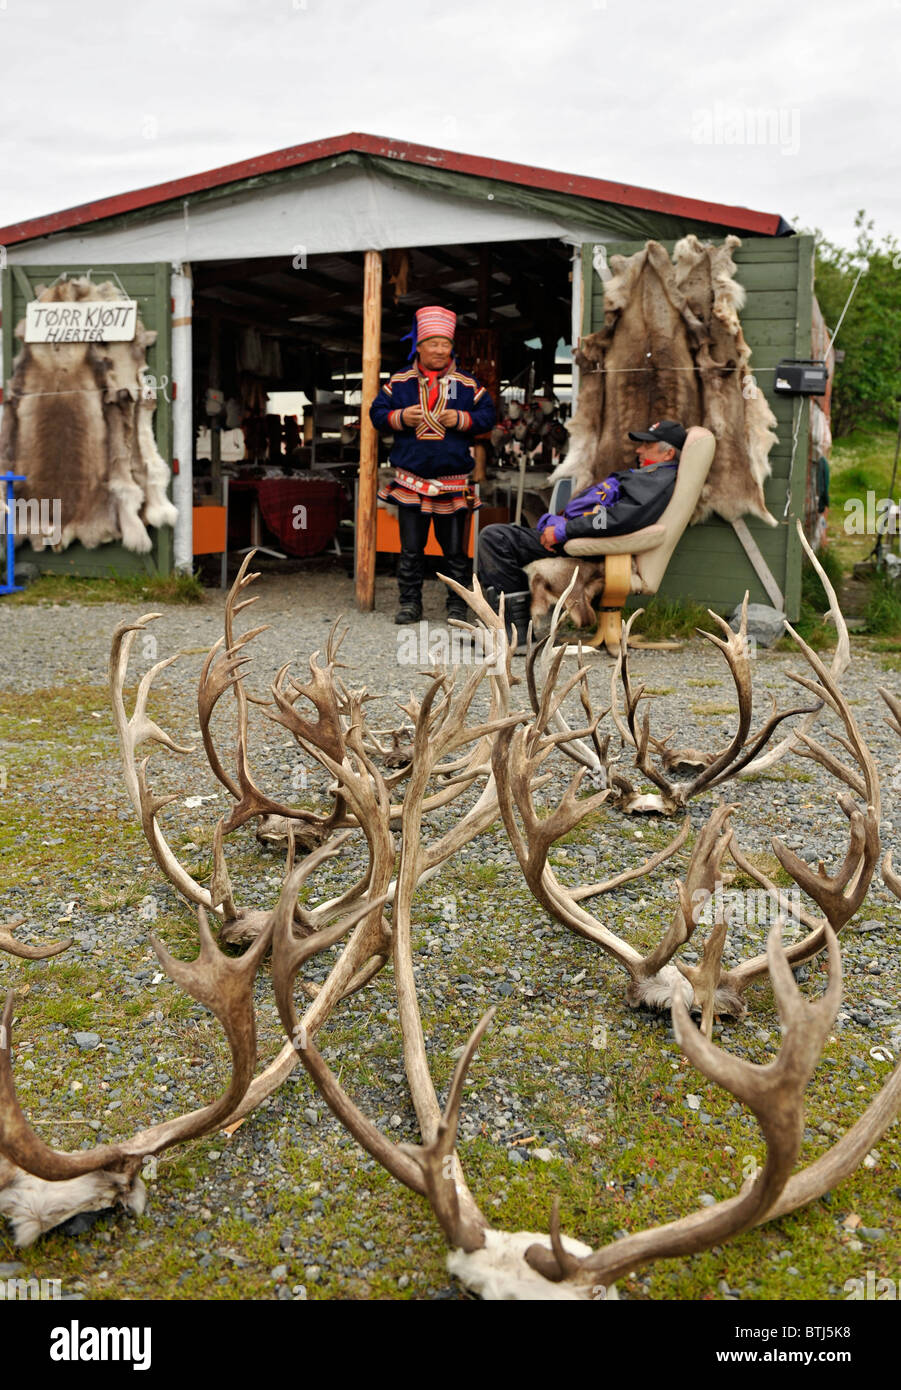 Sami people selling handicraft and souvenirs like reindeer hide and antlers. Isnestoften close to Alta, Finnmark, North Norway. Stock Photo